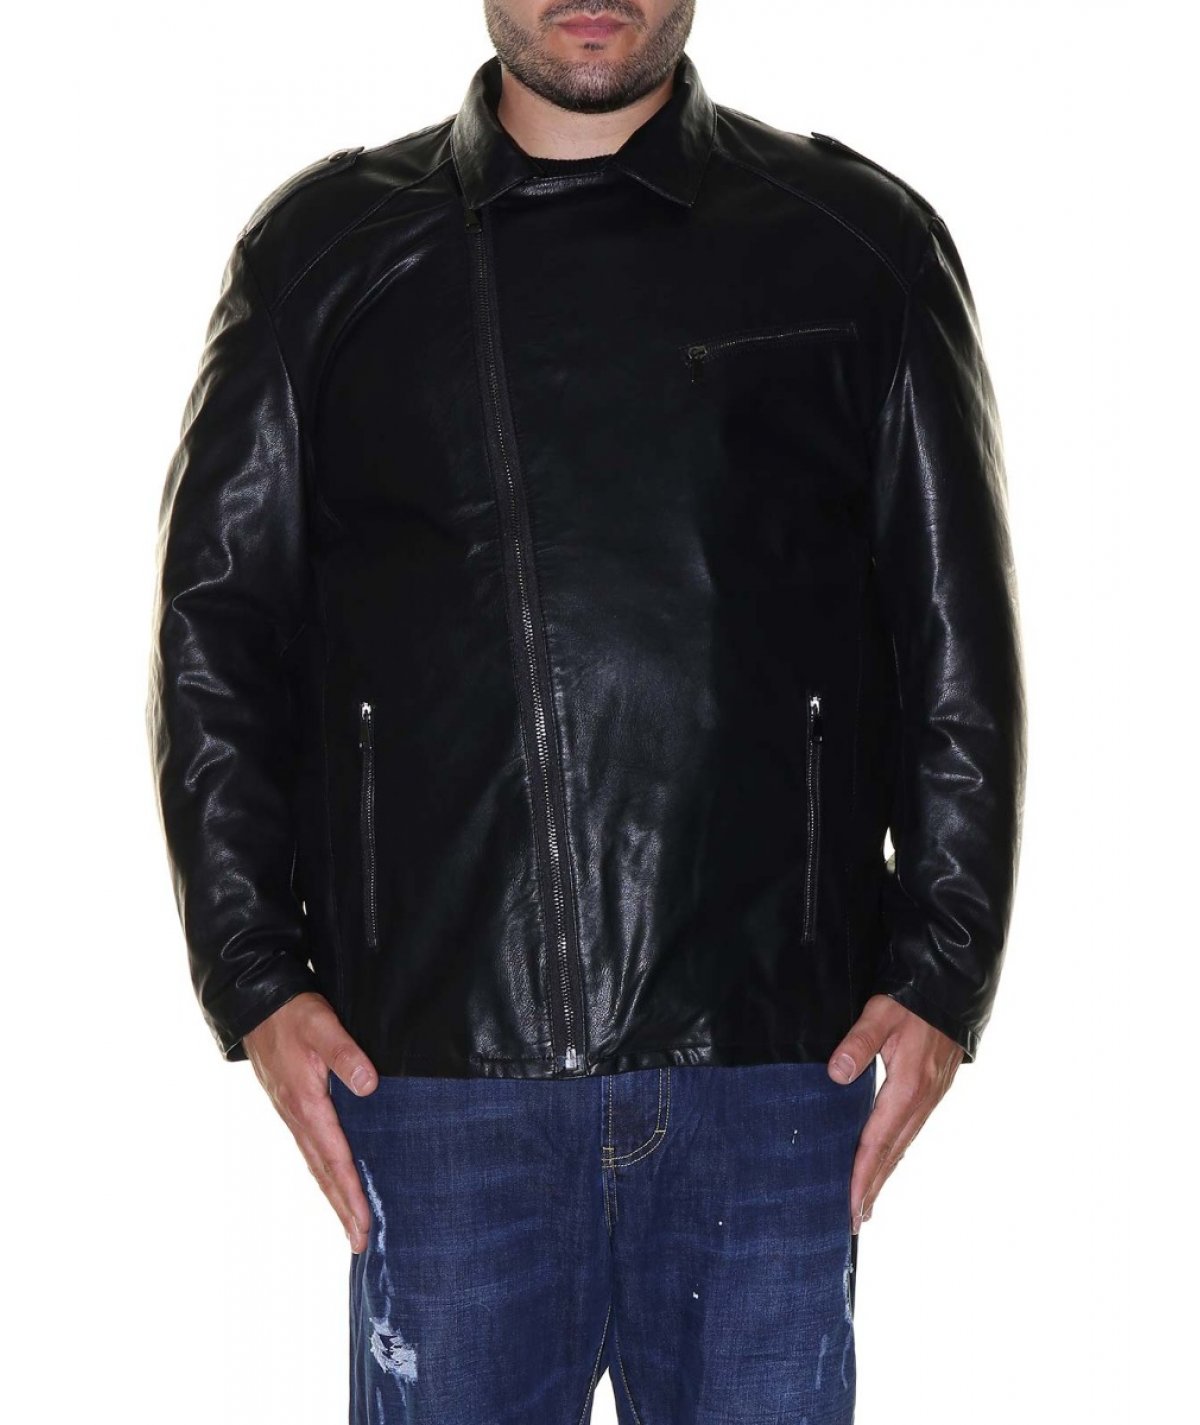 BL38 BY MAXFORT PLUS SIZES MEN`S LEATHER